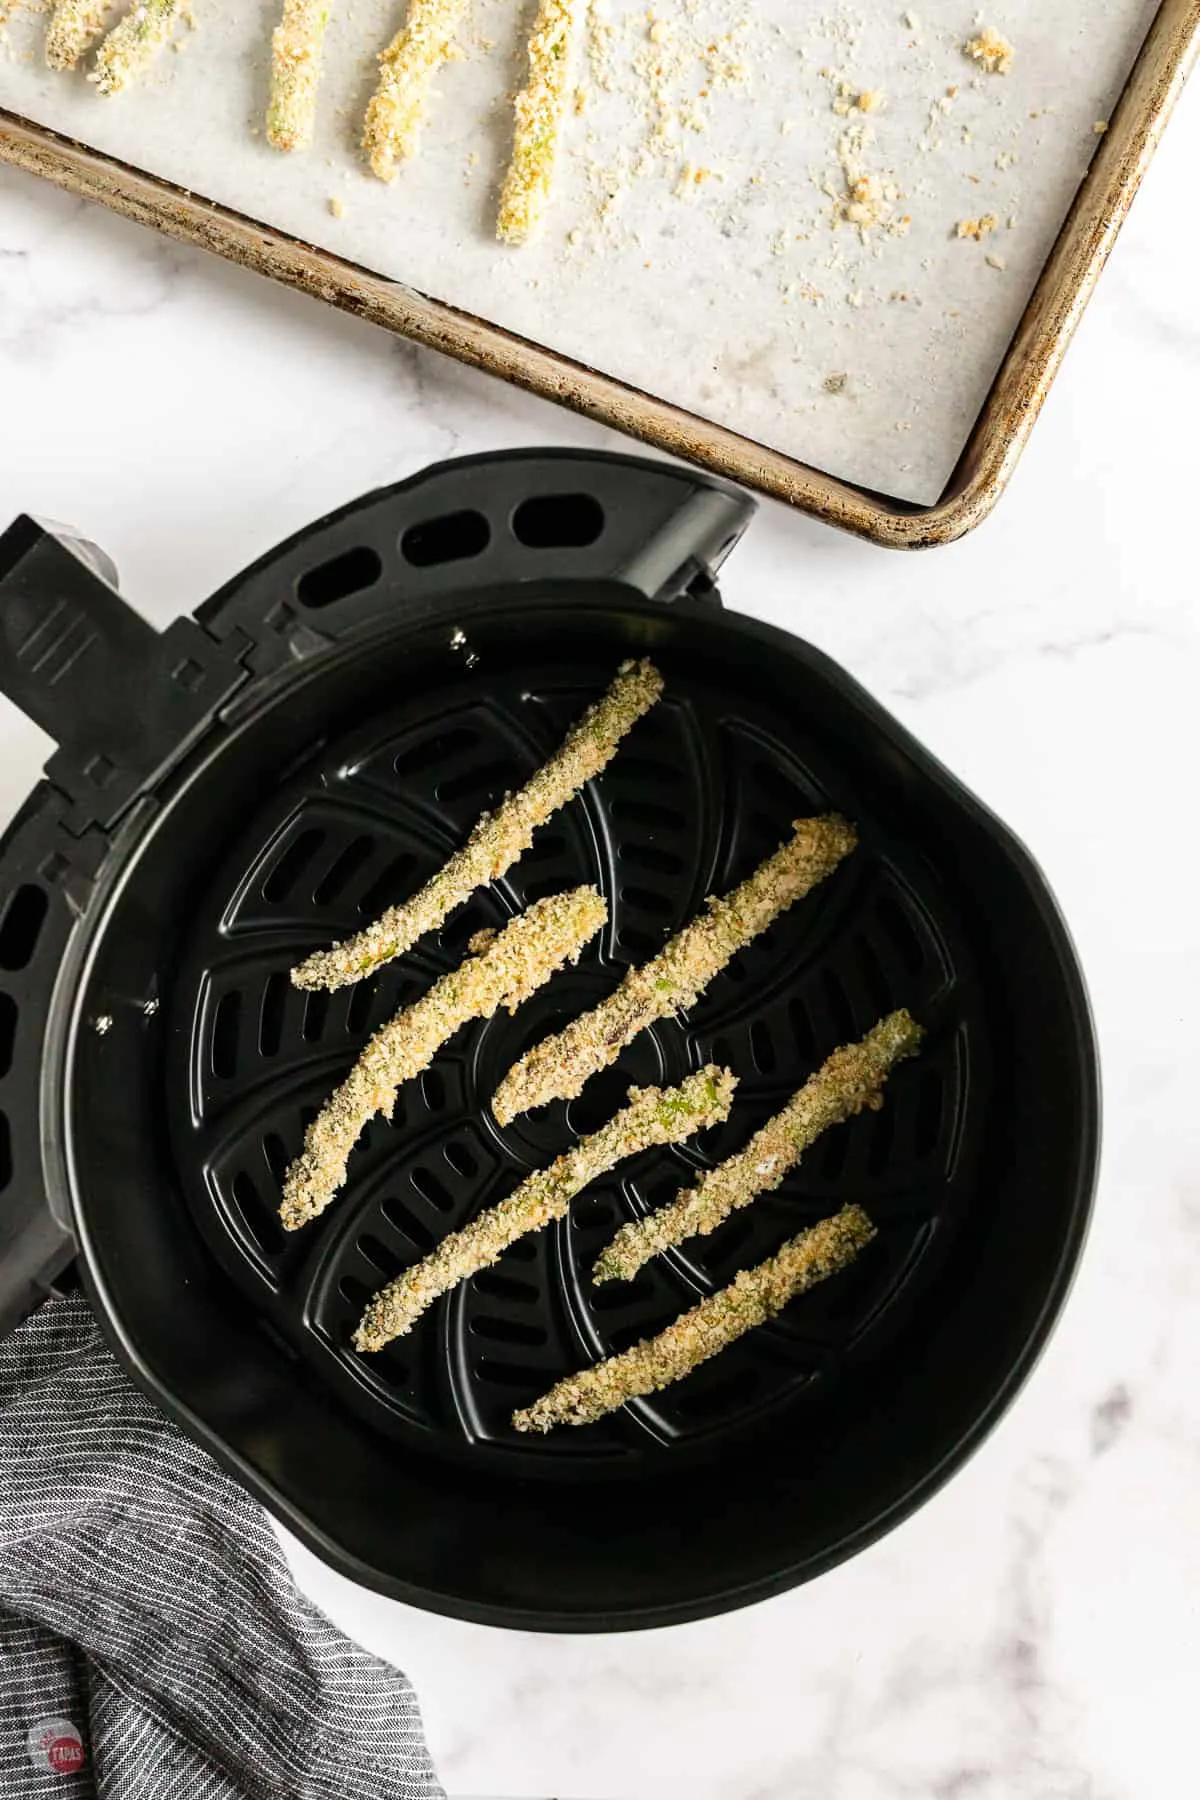 unbaked asparagus in an air fryer basket